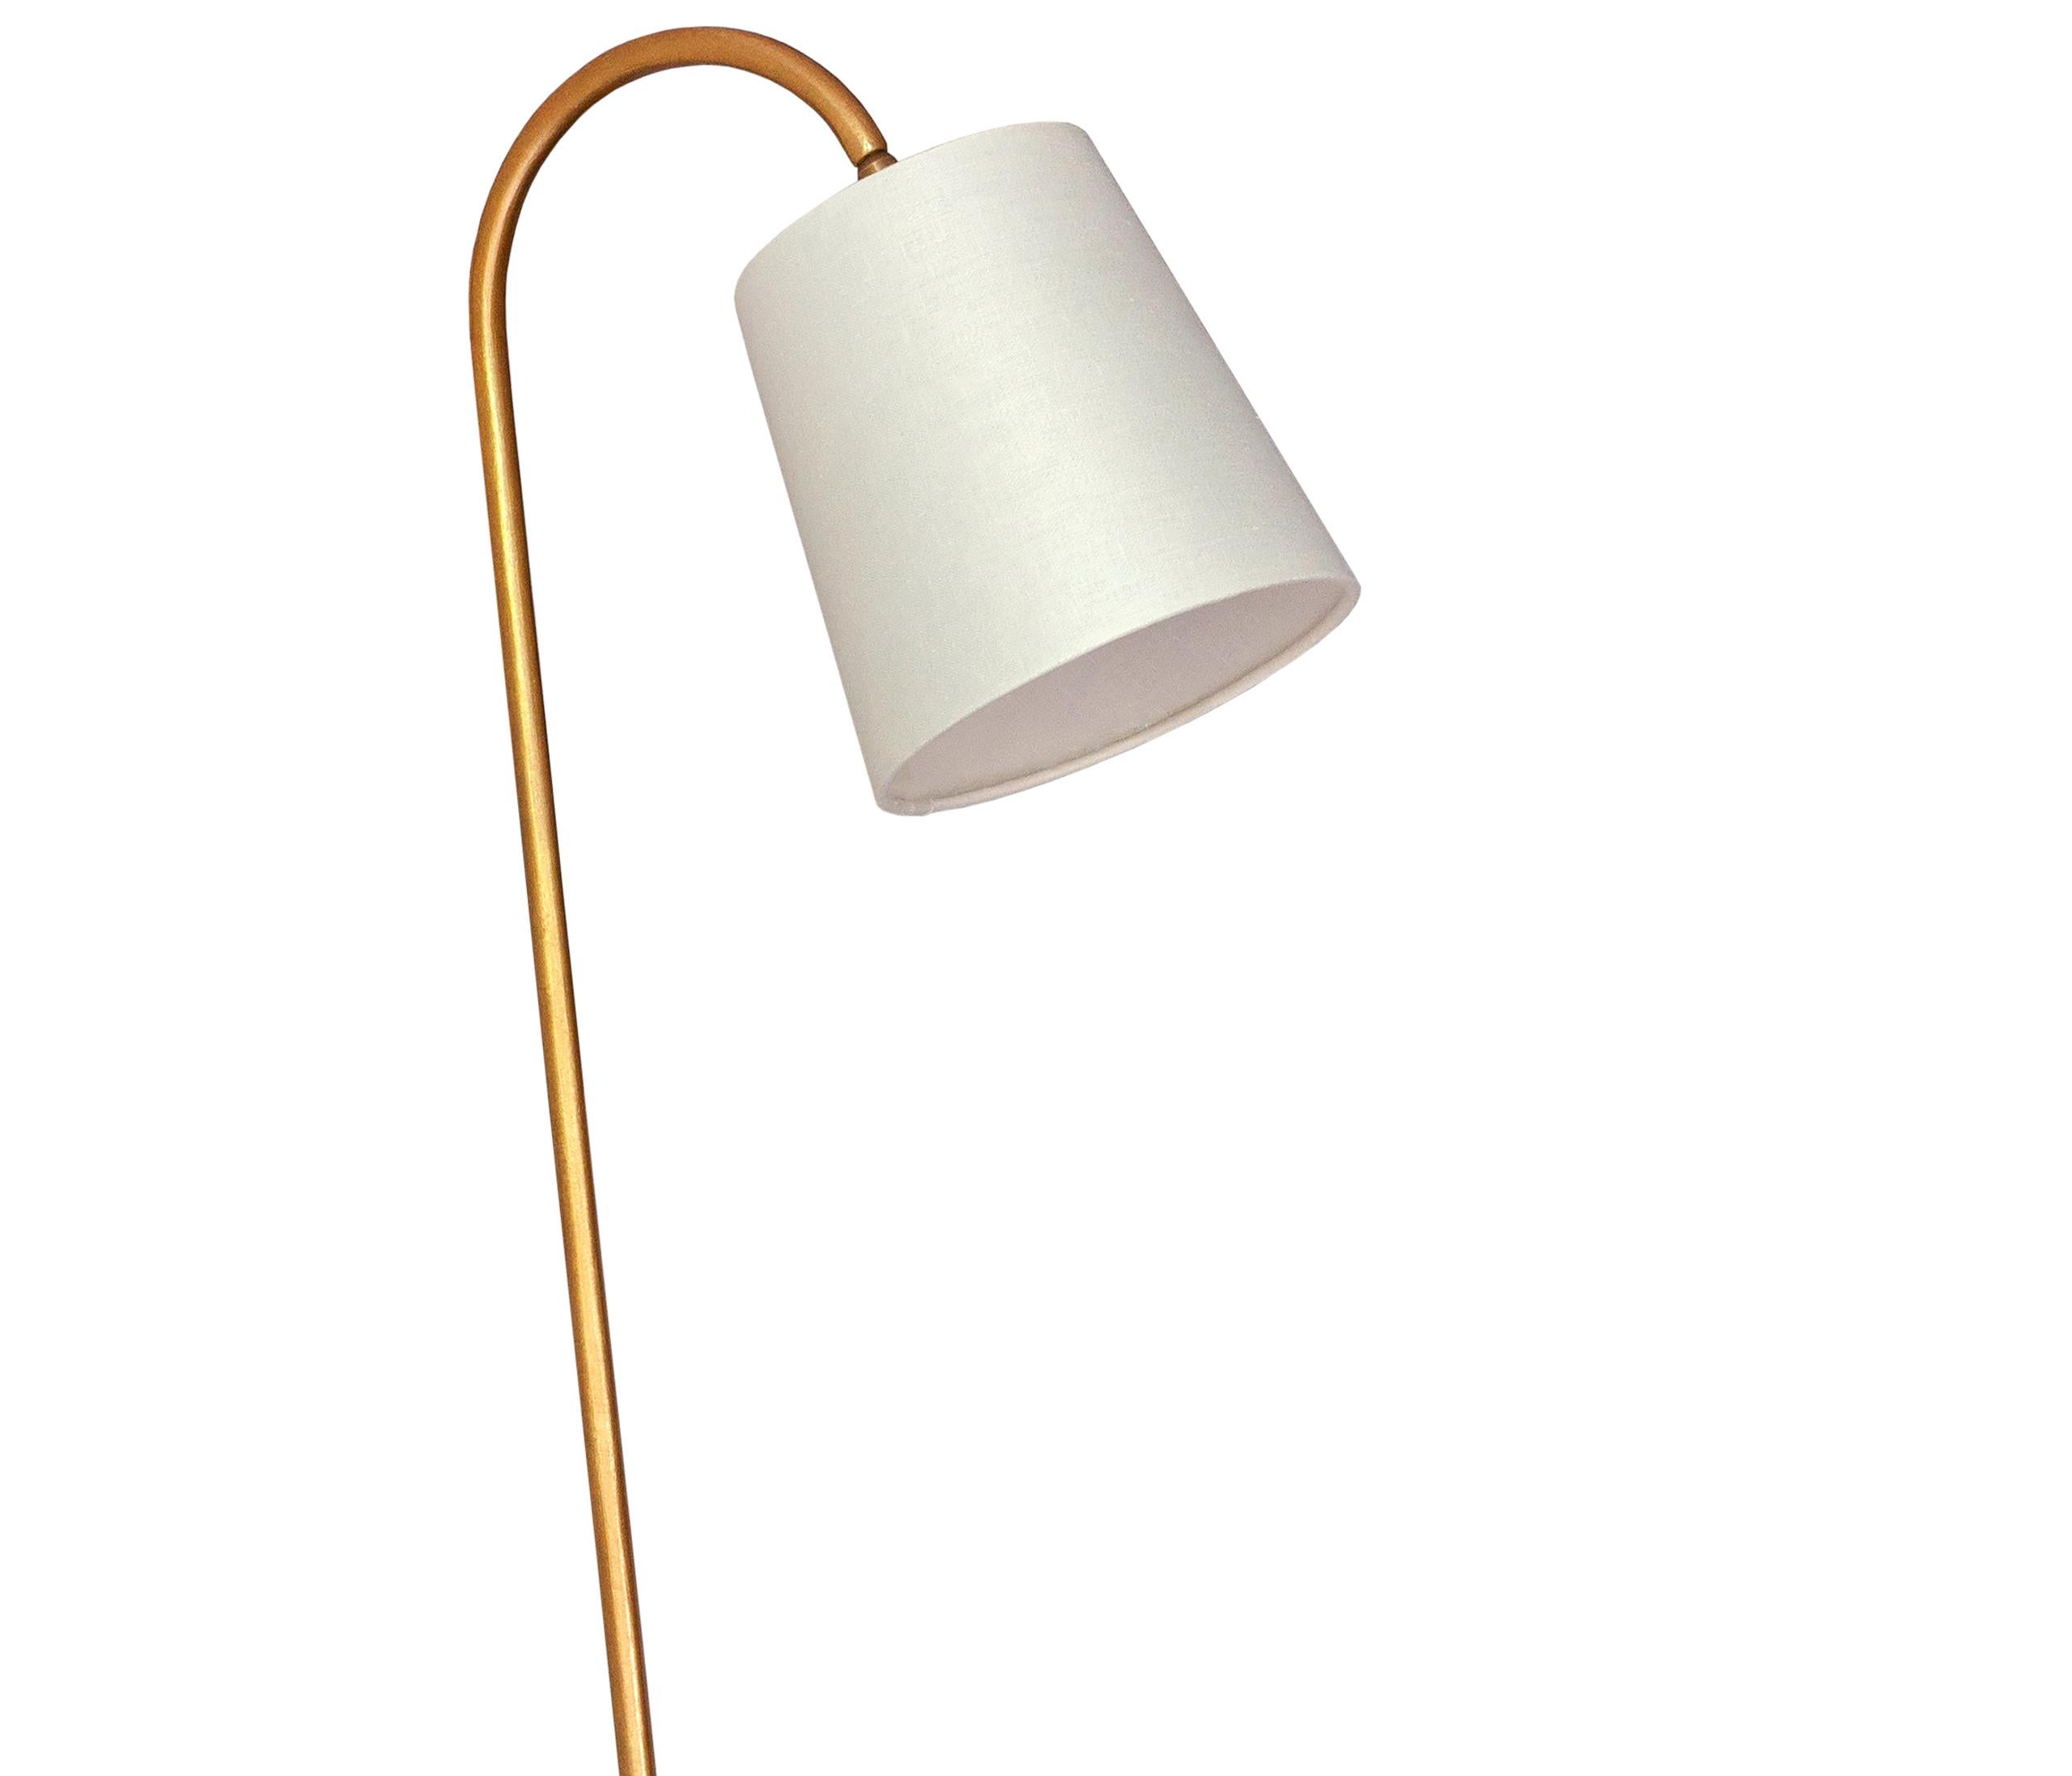 Designed as a practical and versatile floor lamp, with a smooth curve and long stem. Steel with decorative finish.
Currently available on a 4 week lead time.

Linen lampshade included
Lampshade dimensions: Ø 15 top x Ø 20 bottom x H 21 cm / Ø 5,90″